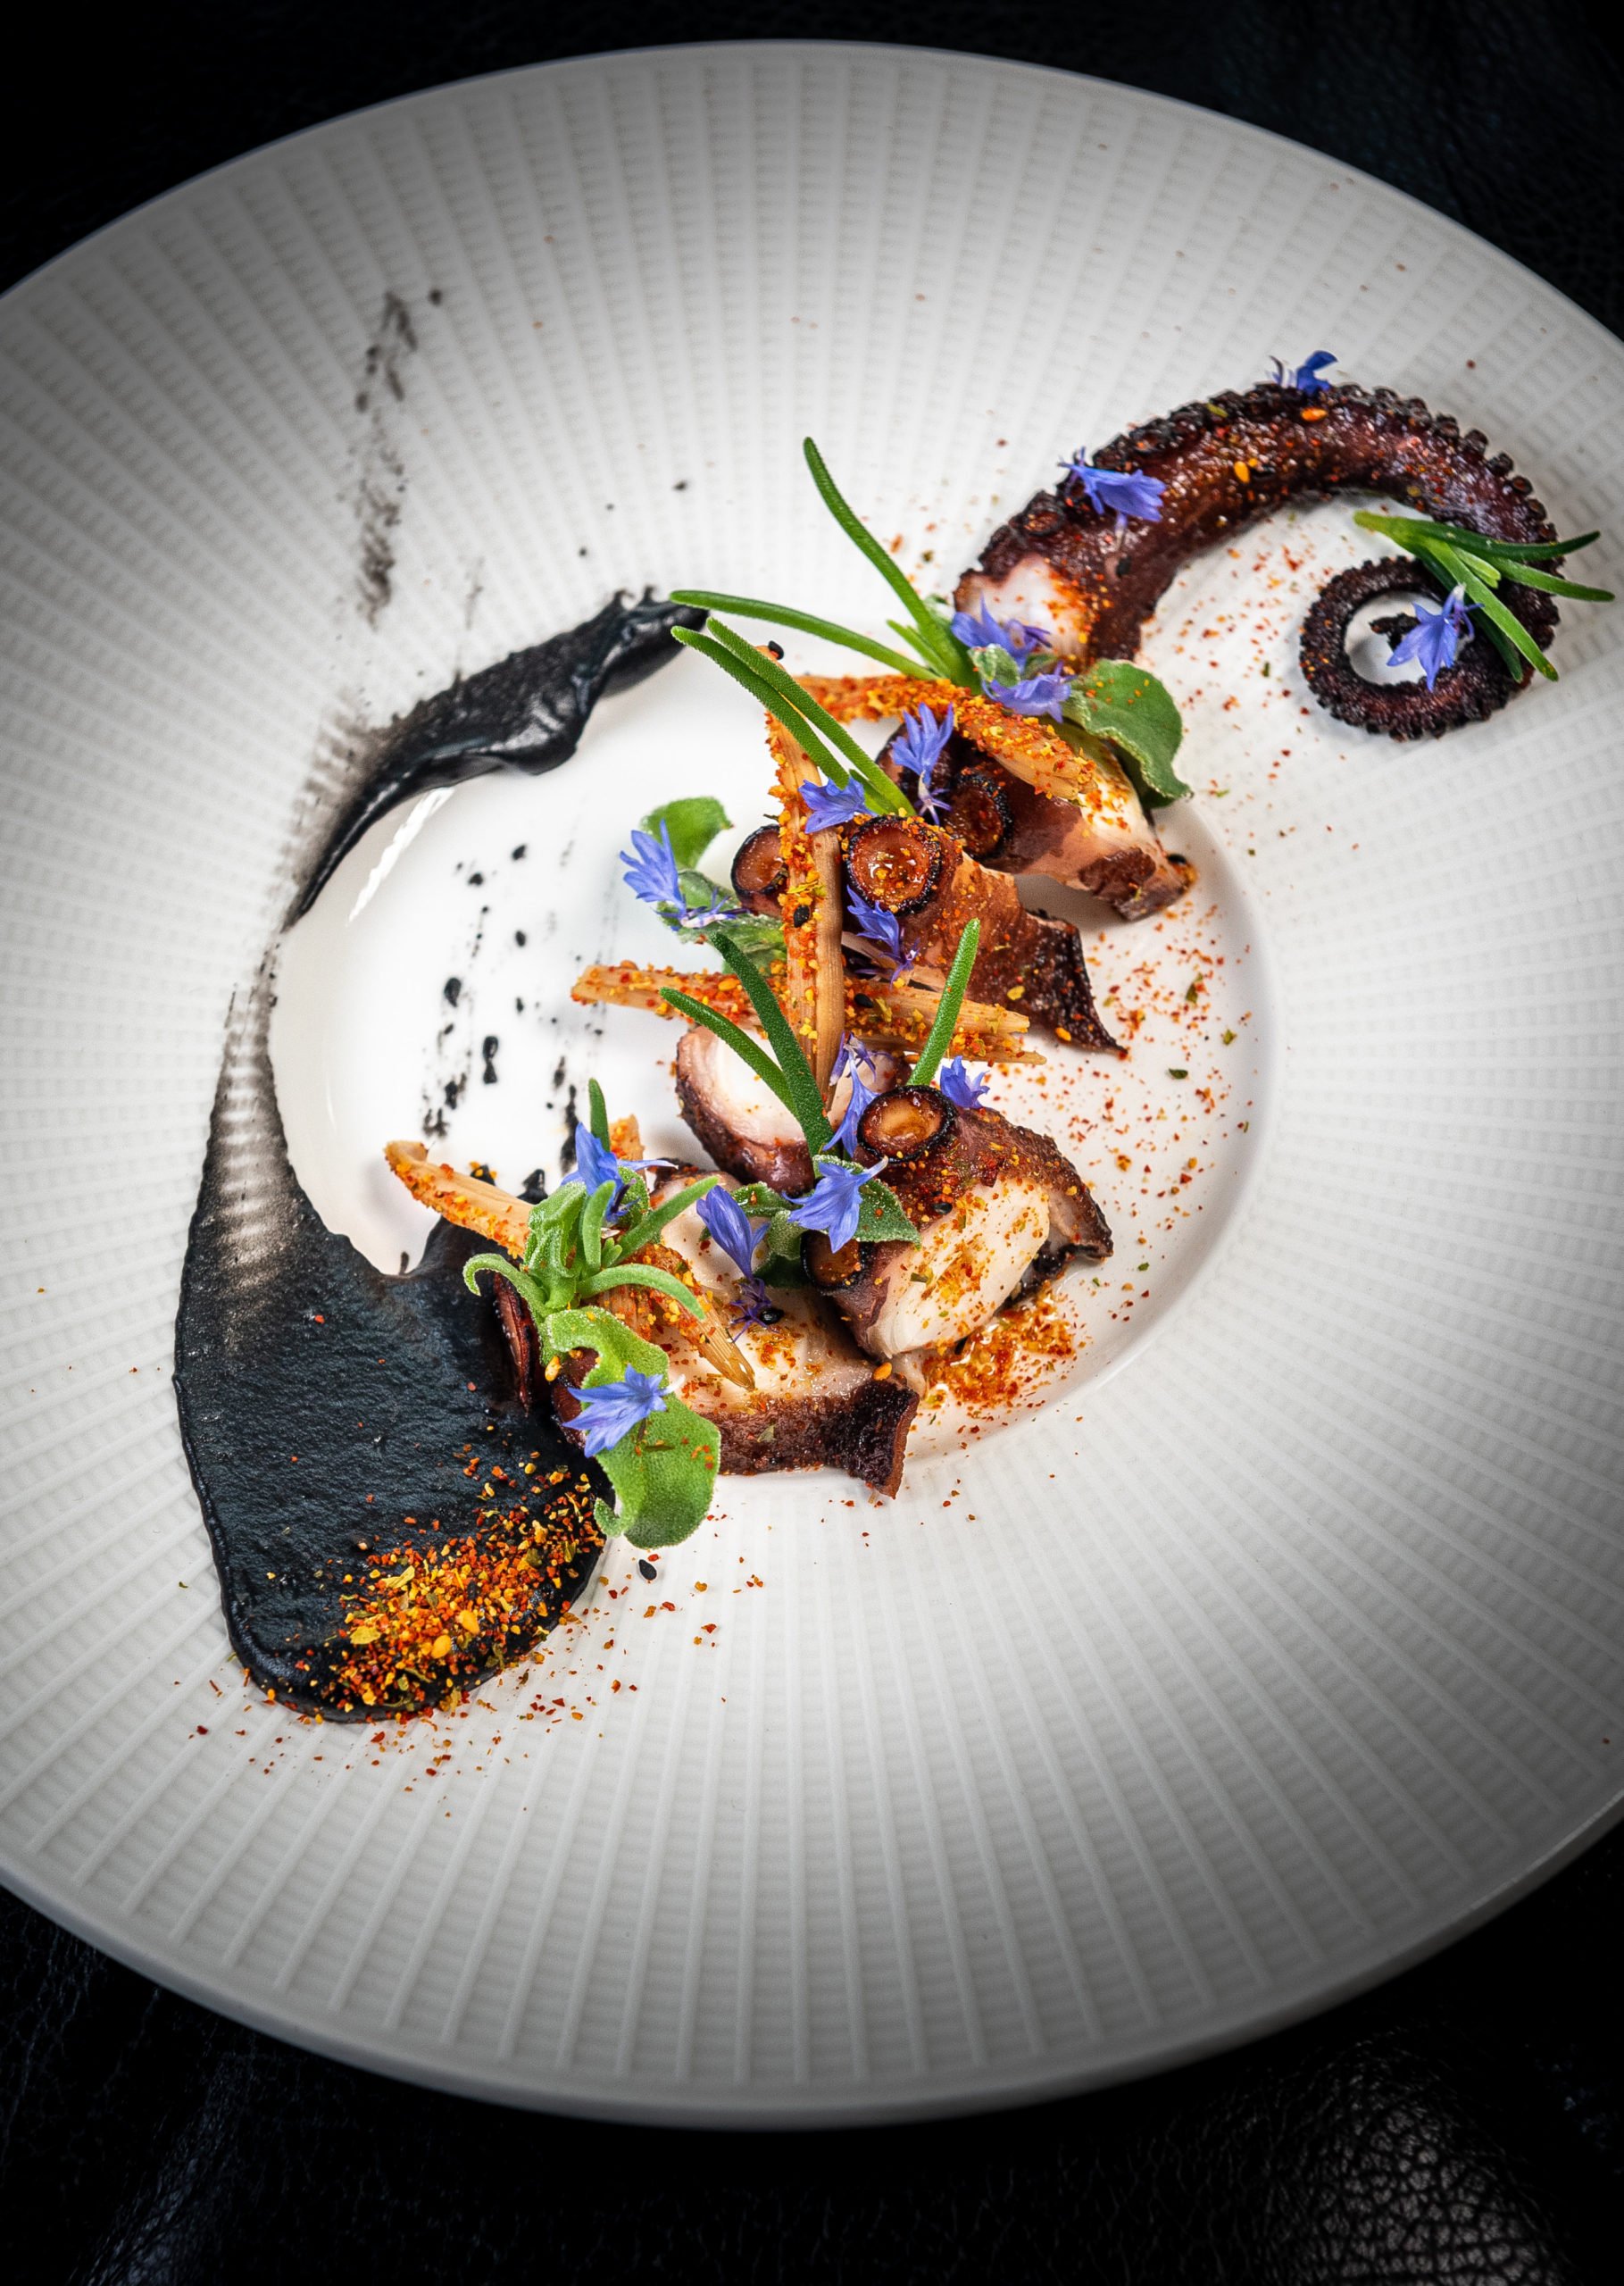 Octopus with smoked paprika oil and sake butter. Photo by Rey Lopez.